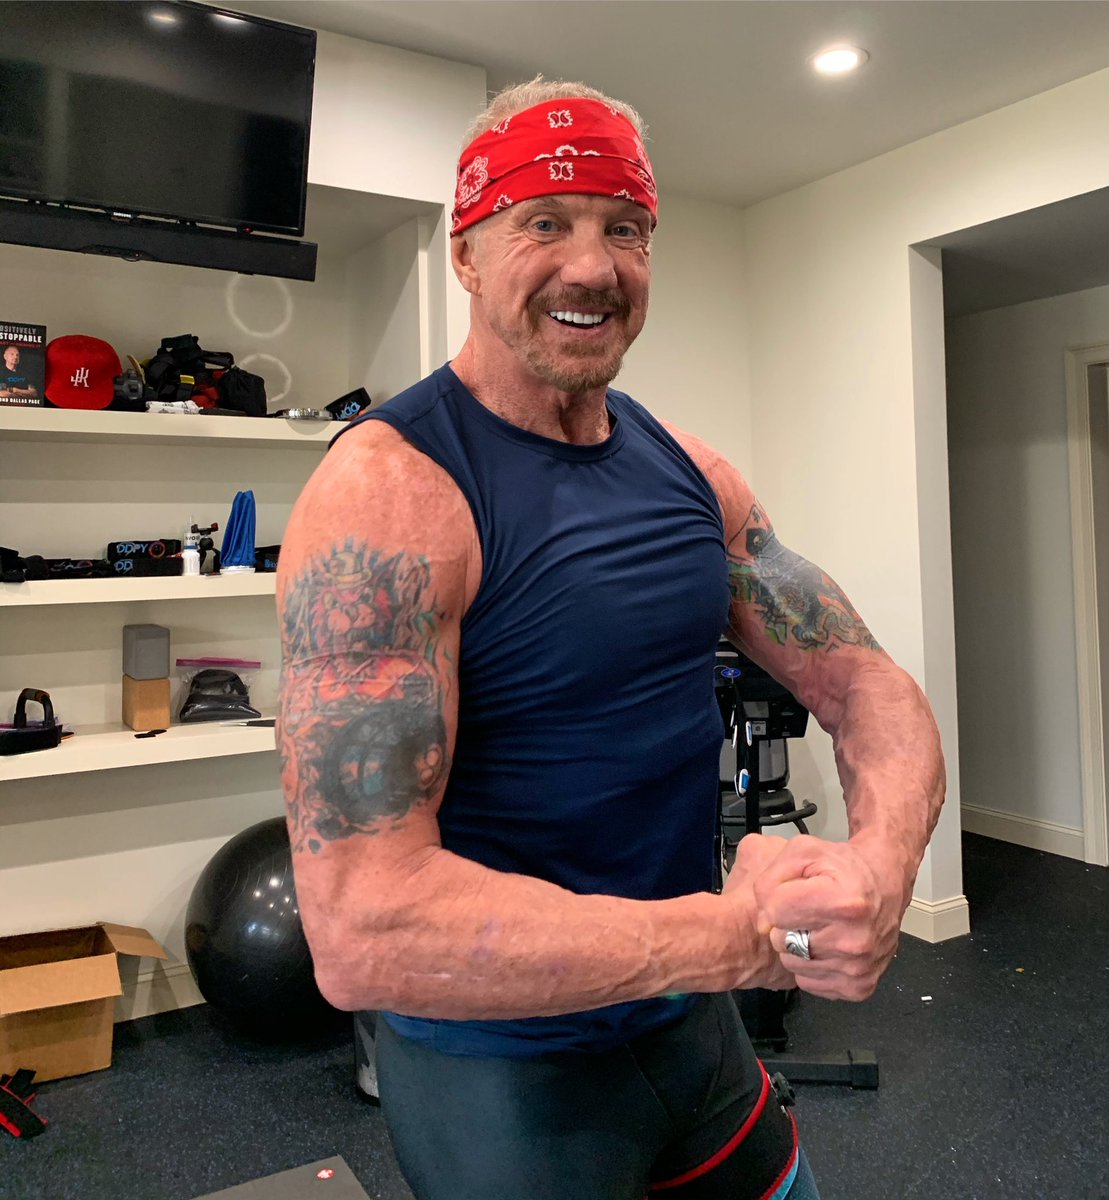 Diamond Dallas Page on X: From Unbeatable to Immobile to